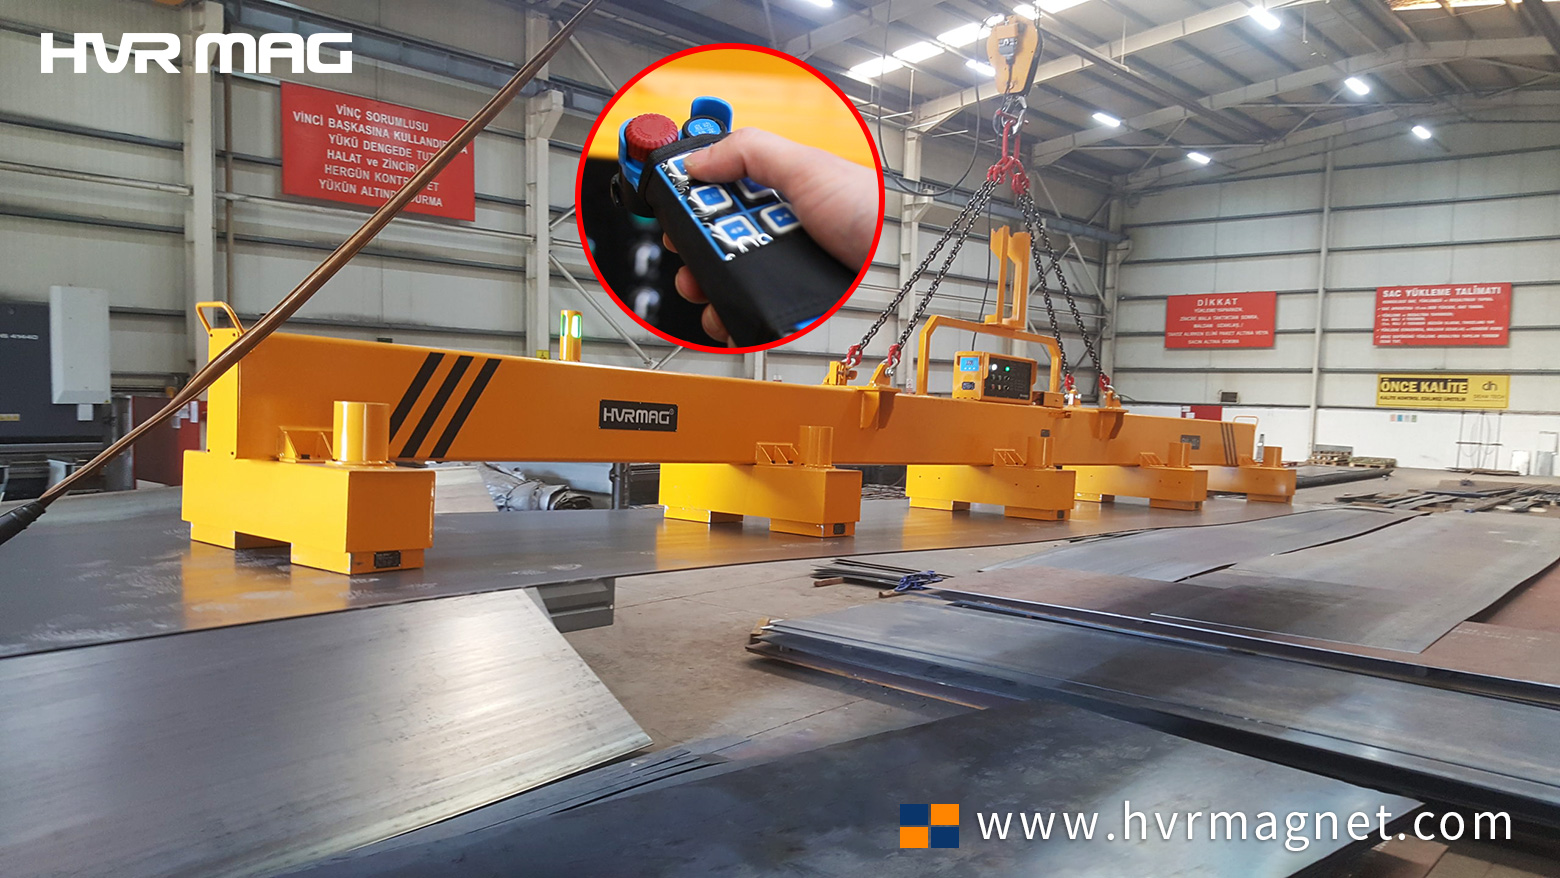 steel magnetic lifting beam handling steel plate, remote controlled - HVR MAG